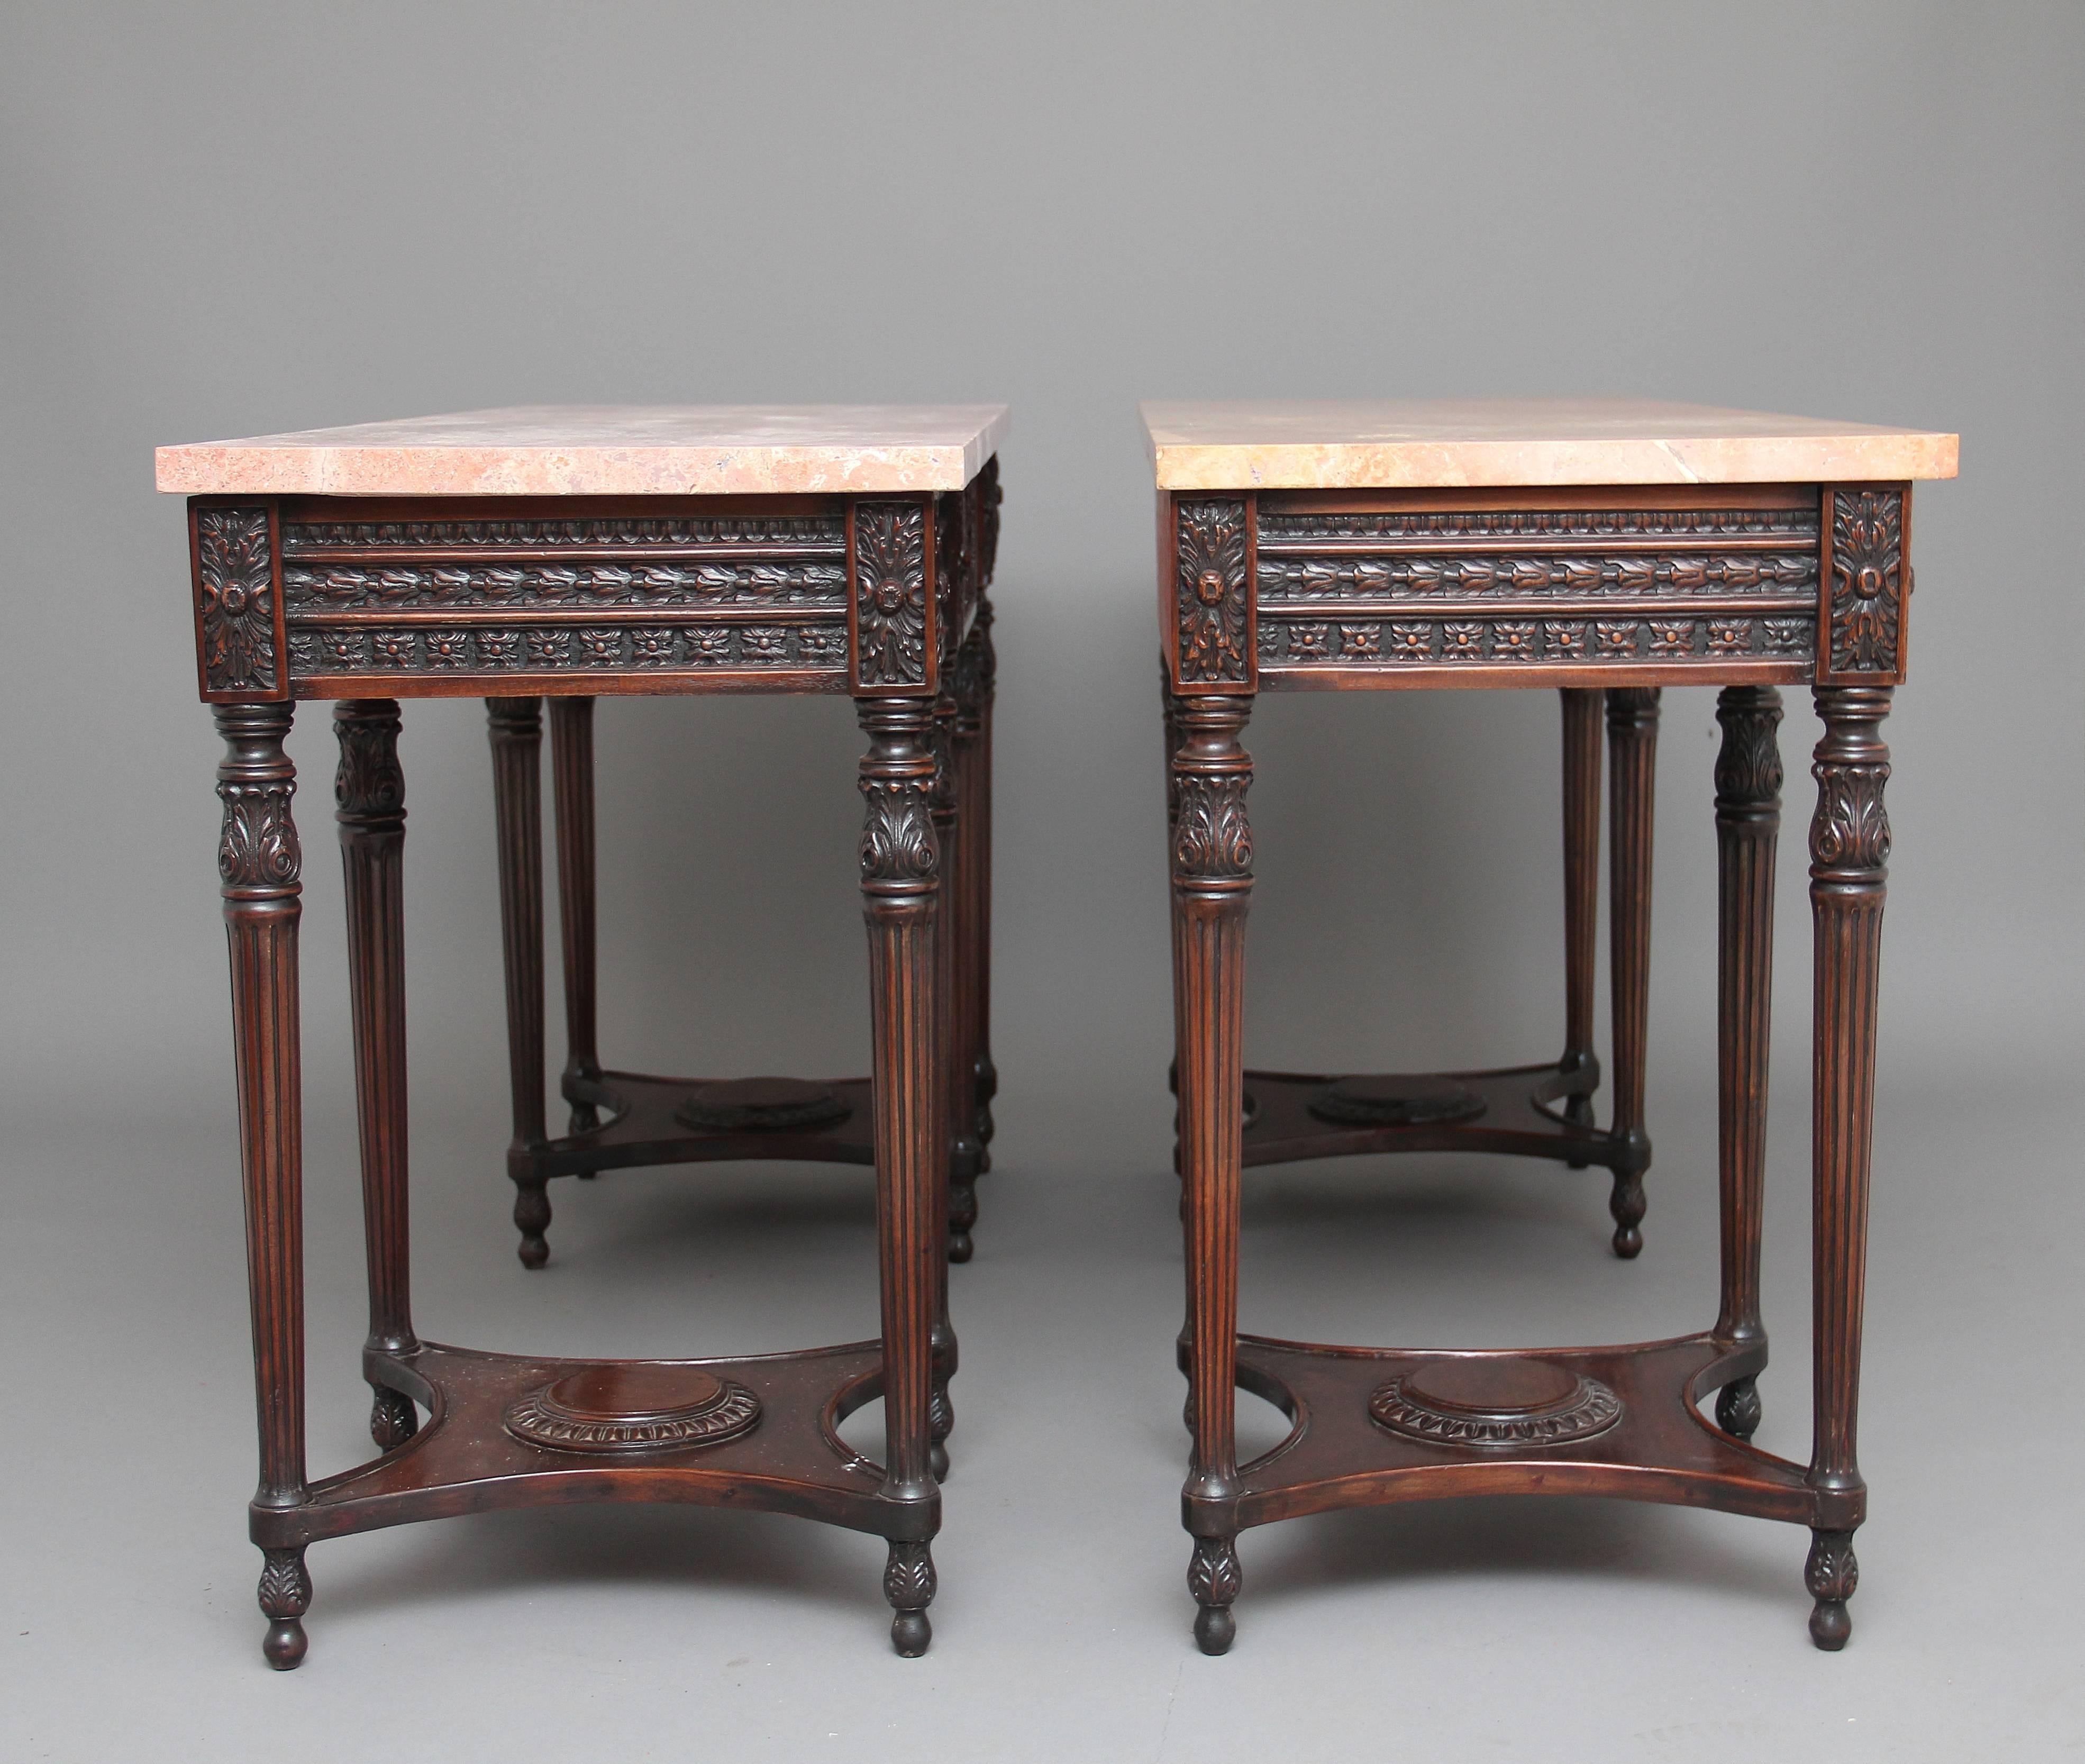 A pair of early 20th century mahogany and marble-top console tables in the Adams style, the console’s having pink flecked marble tops, with a profusely carved frieze below with carved patraes and a single drawer at the centre, the frieze also having